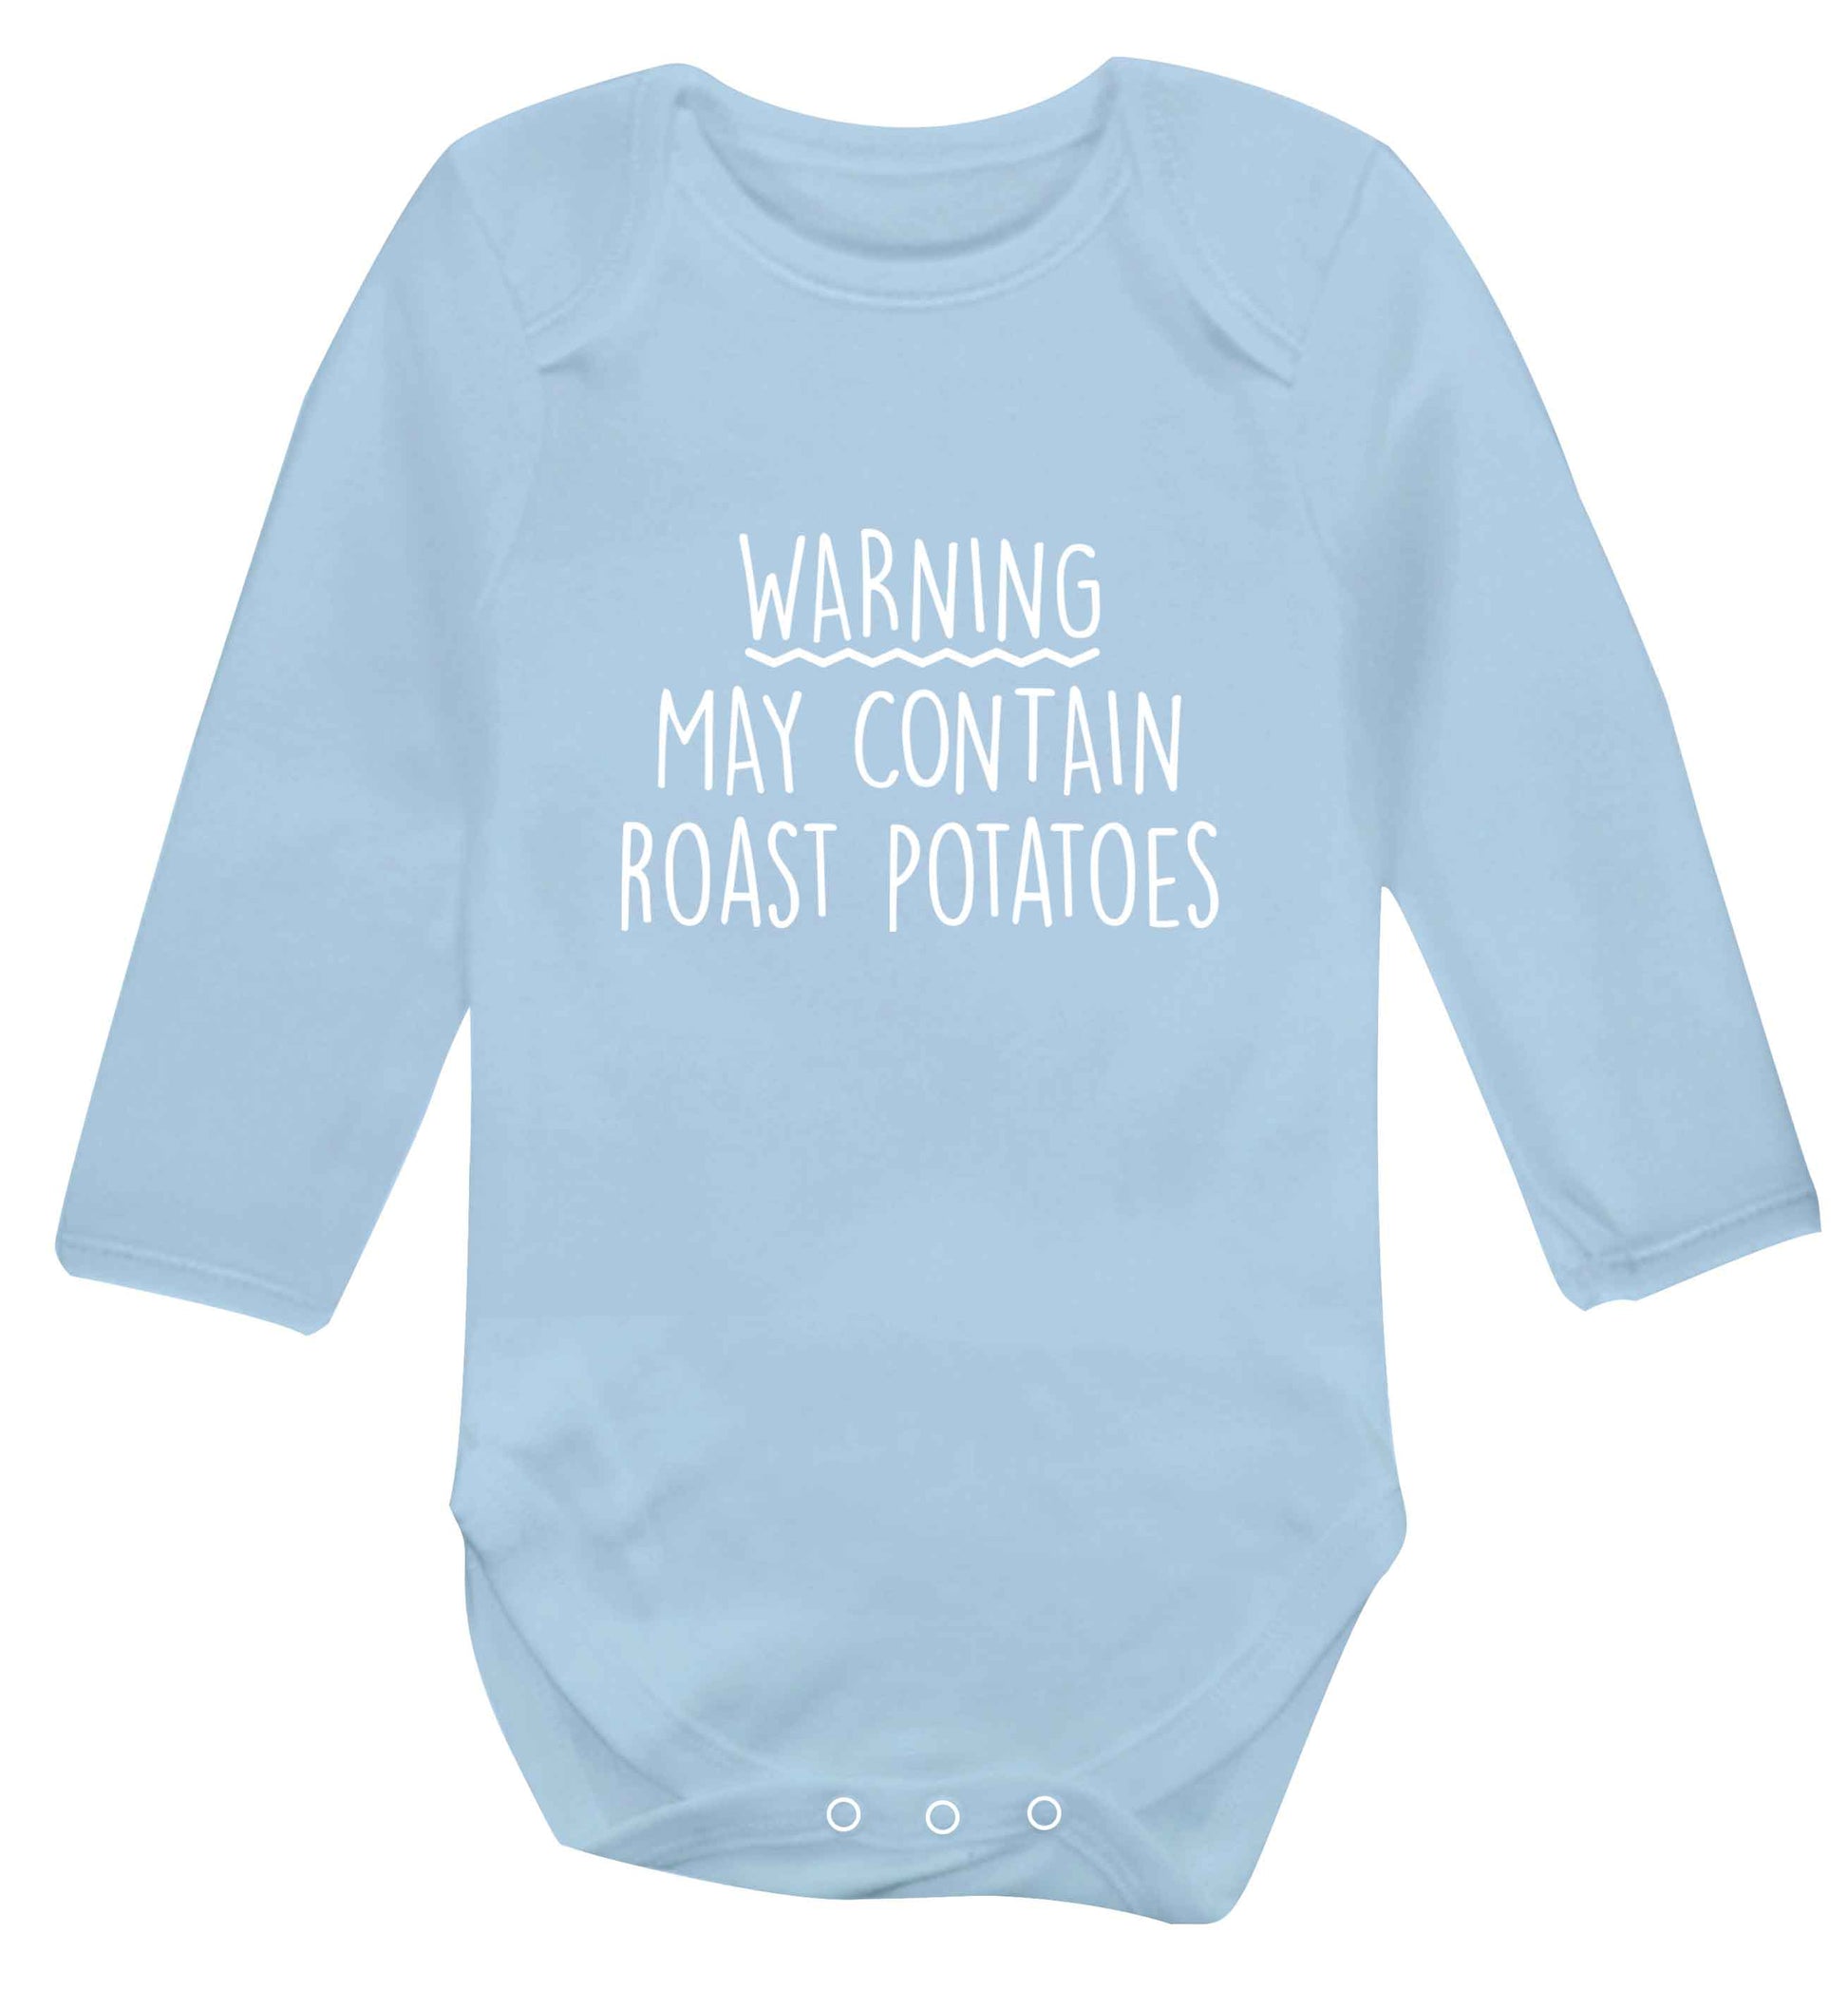 Warning may containg roast potatoes baby vest long sleeved pale blue 6-12 months